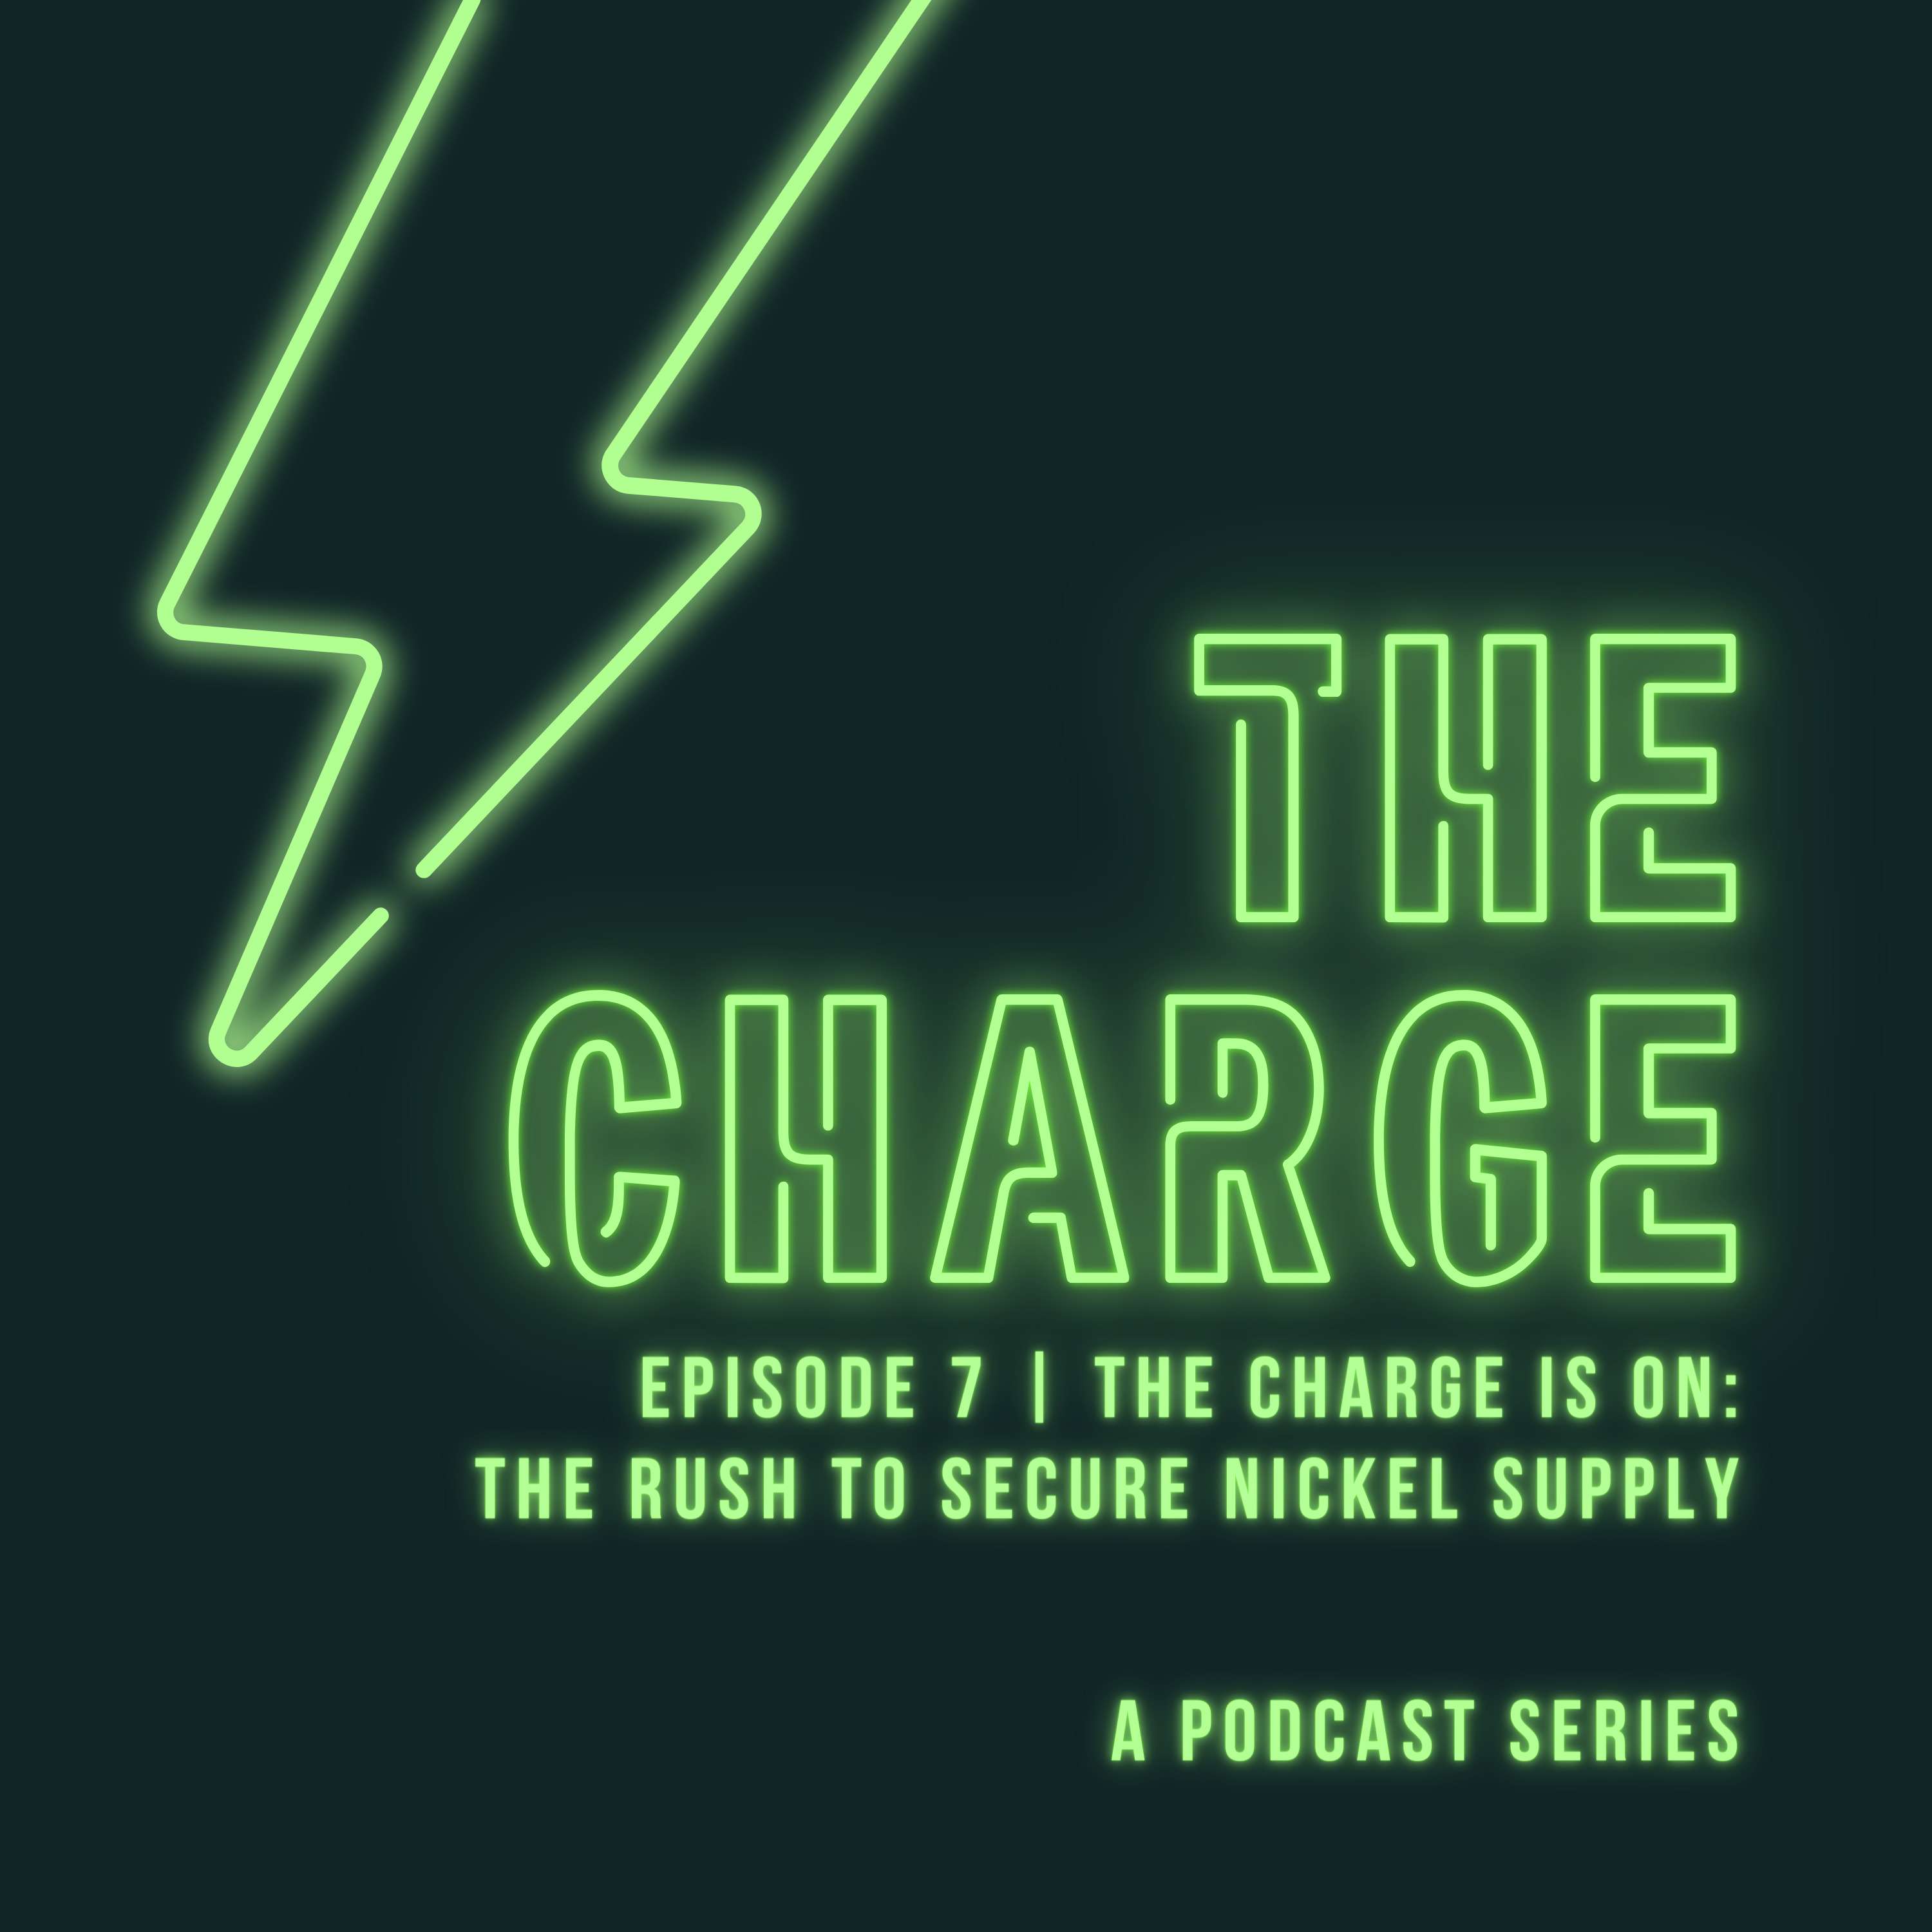 The Charge is on: the rush to secure nickel supply